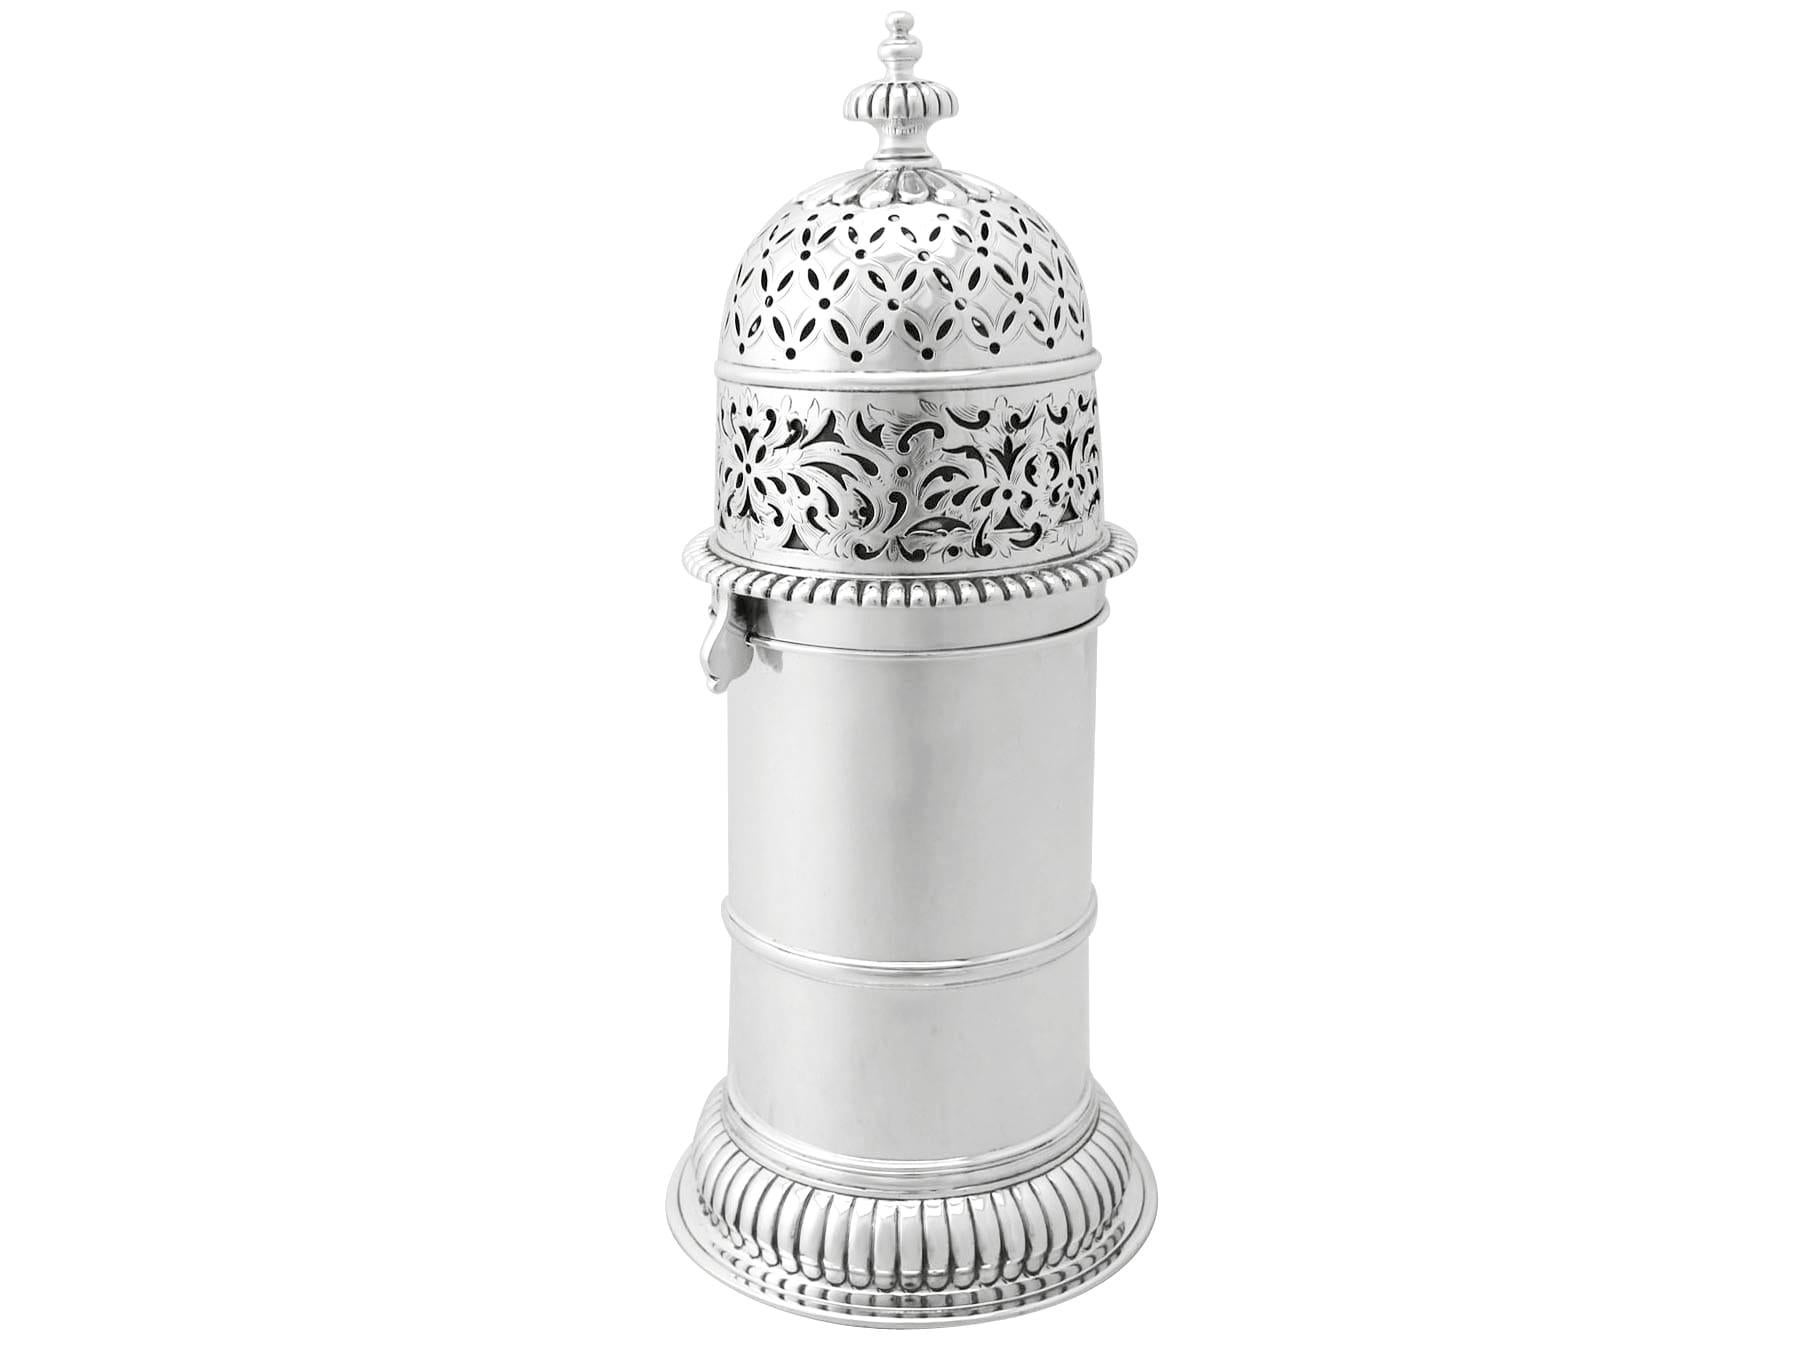 A magnificent, fine and impressive, large antique George V English sterling silver lighthouse style caster, part of our silverware collection.

This magnificent and large antique George V English sterling silver sugar caster has a cylindrical form